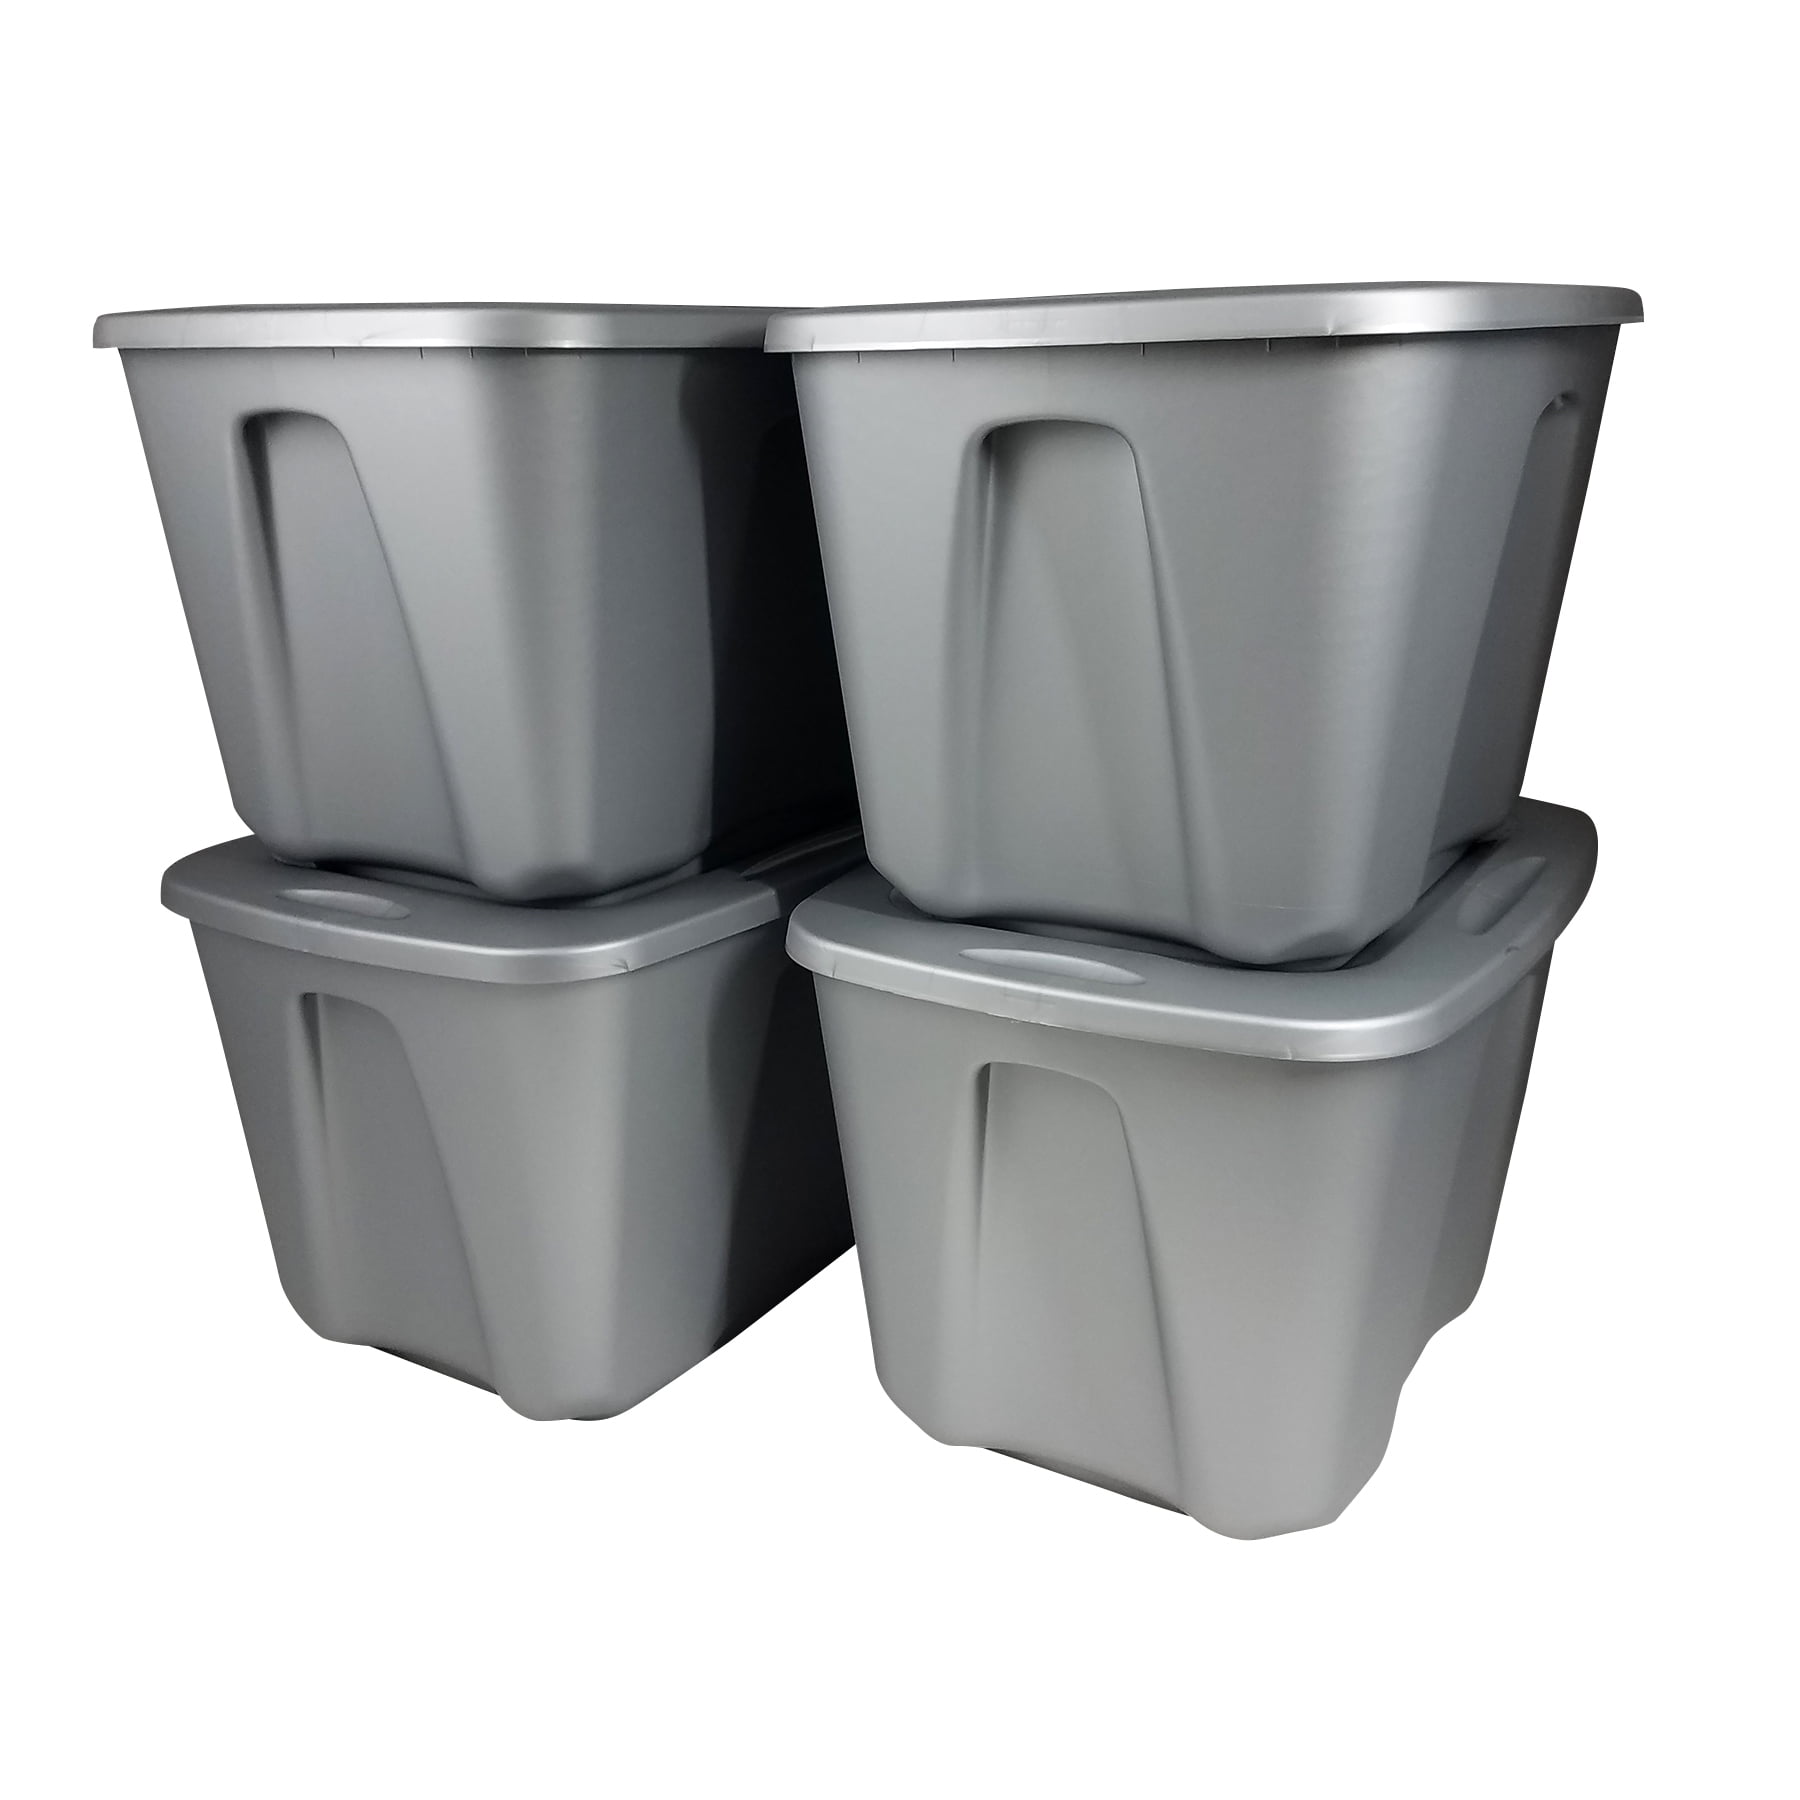 Homz Plastic Storage Tote Box, With Lid, 10 Gallon, Black and Silver,  Stackable, 1-Pack